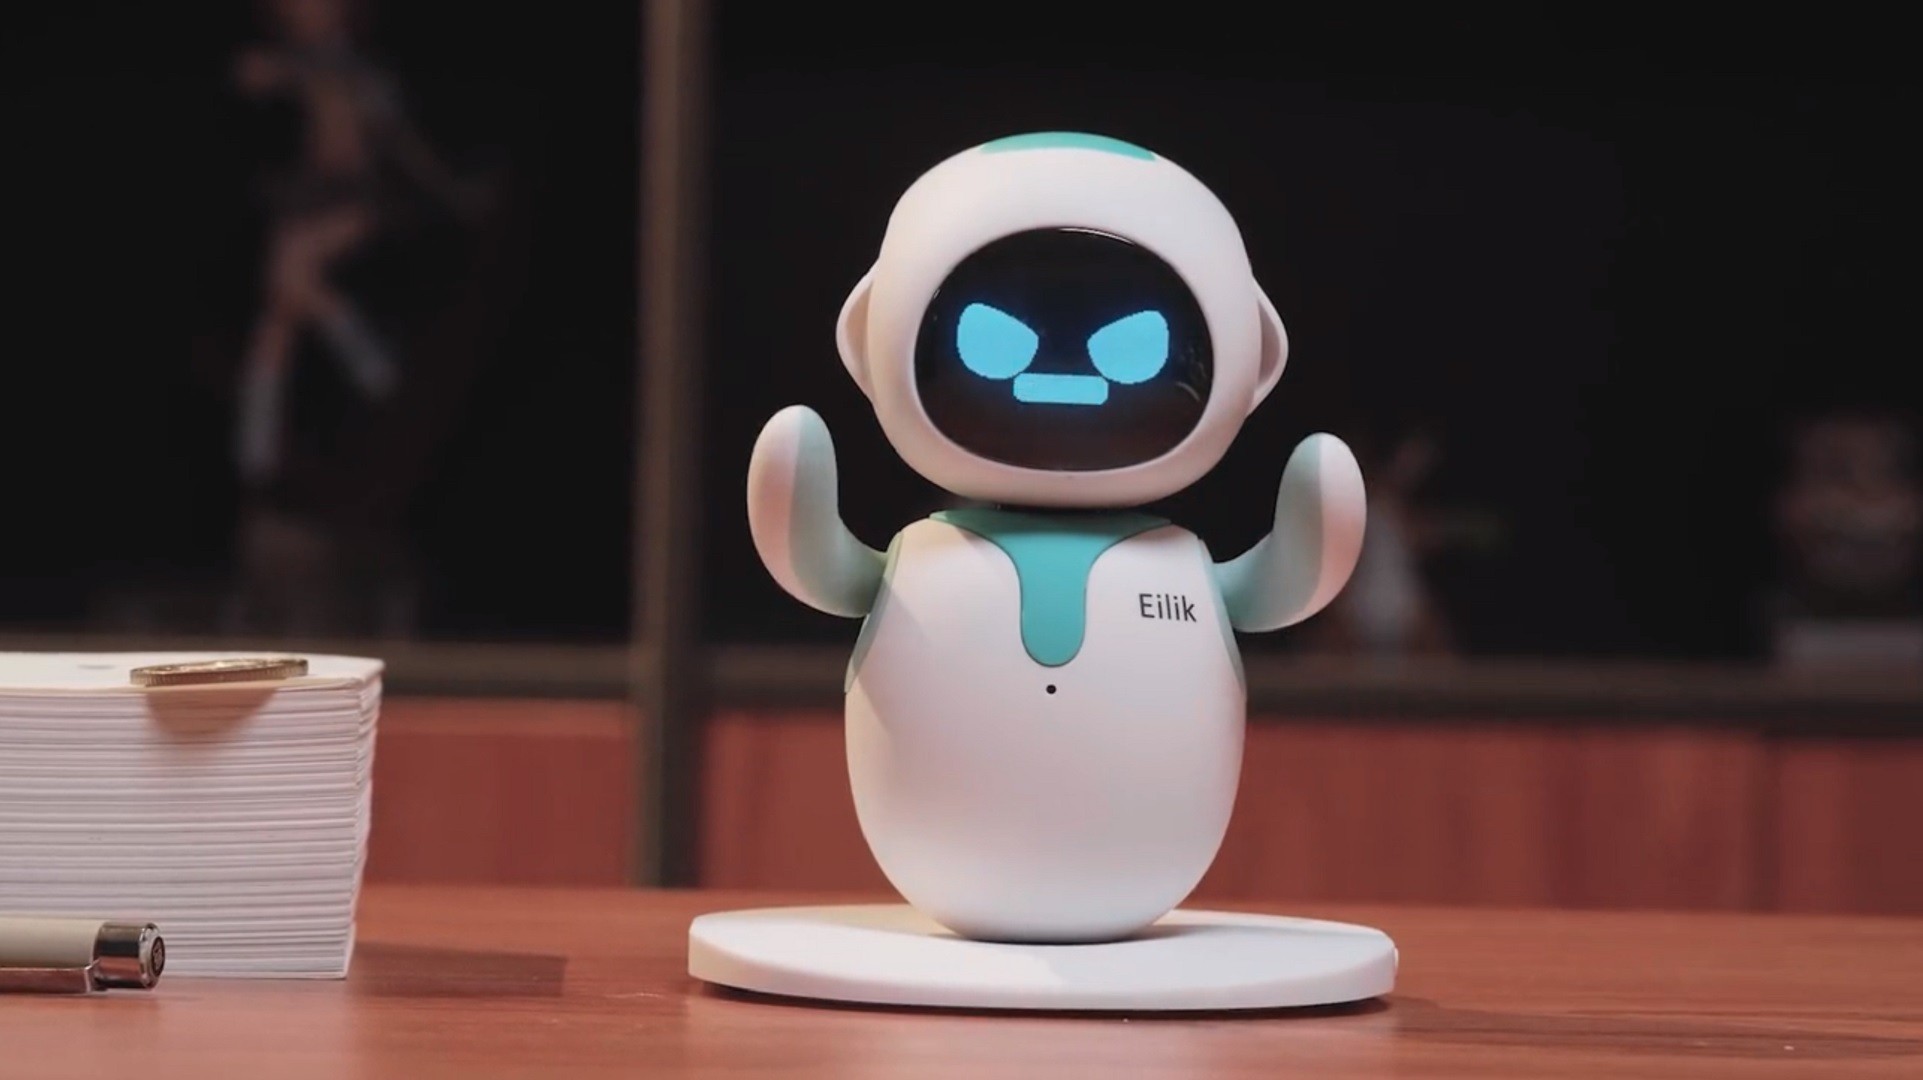 Minion-Like Robot Is Simply Irresistible, You'll Never Feel Lonely or Bored  Again - autoevolution